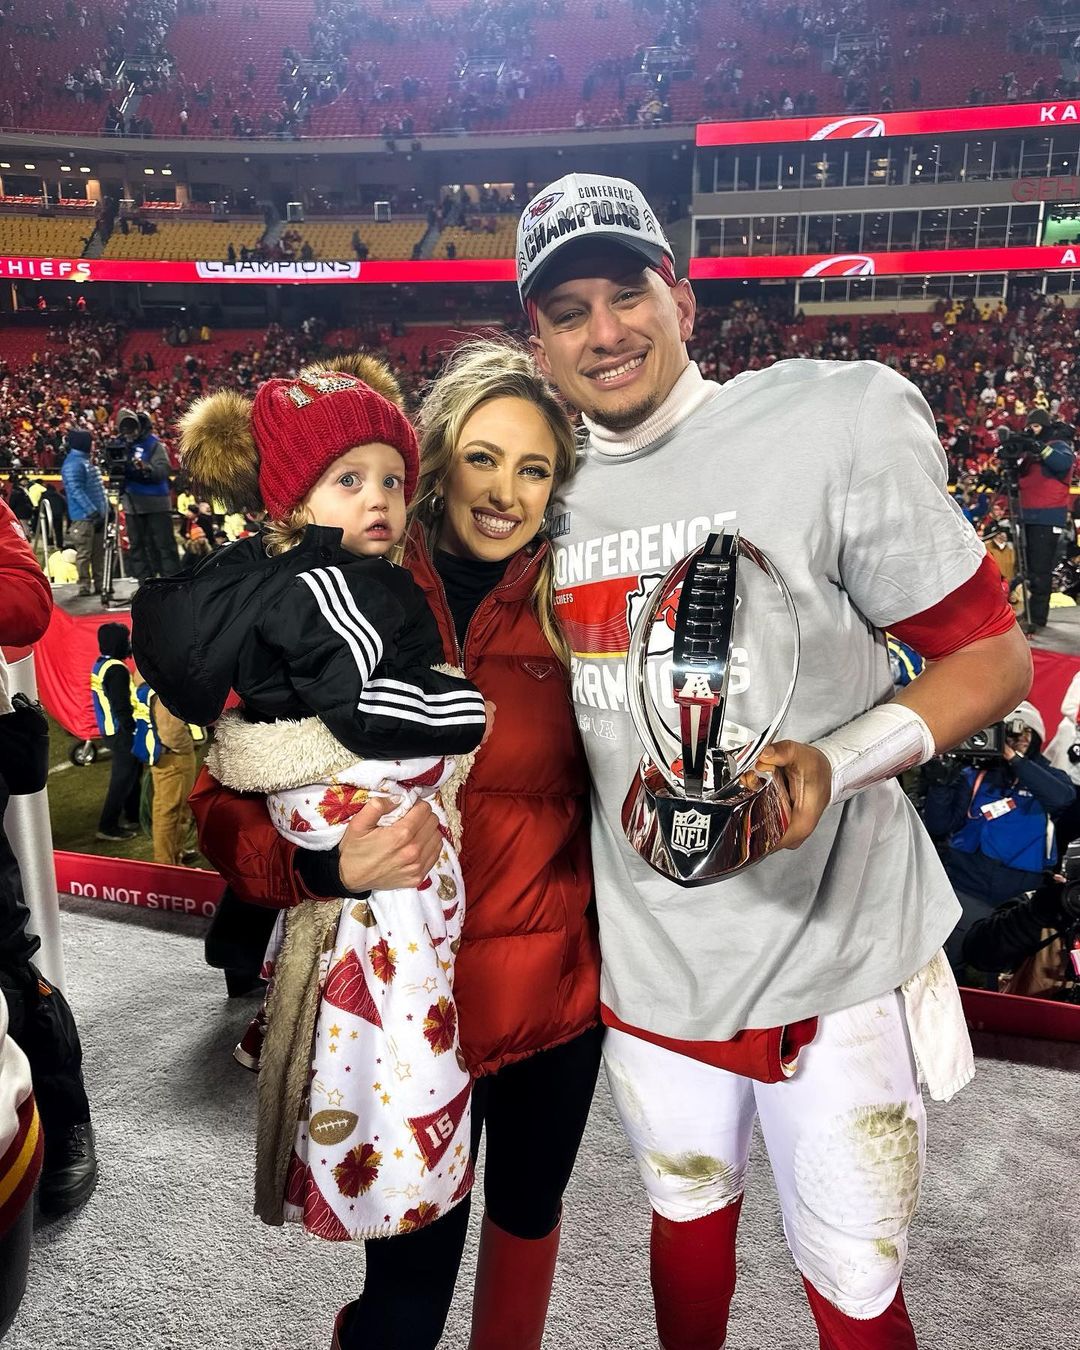 When did Patrick Mahomes propose to Brittany Matthews?